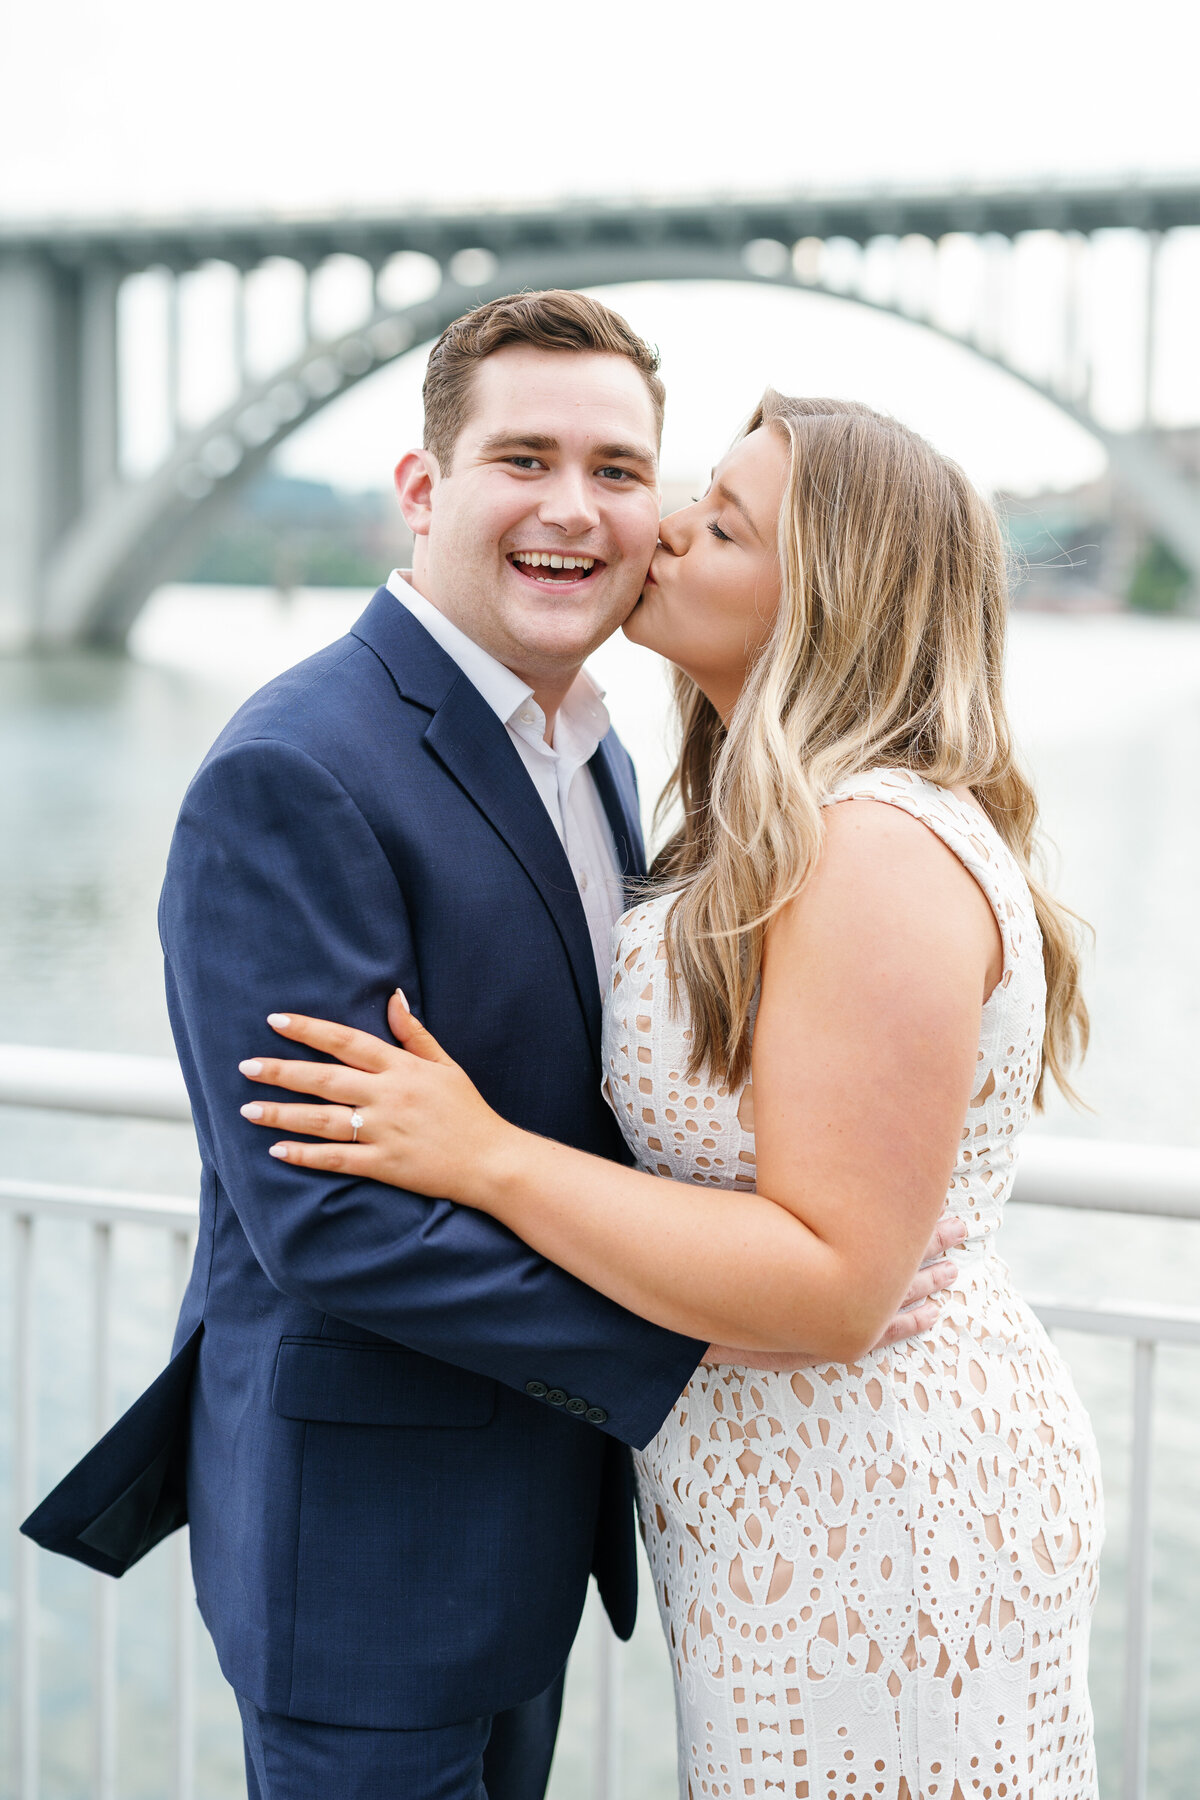 Paige and Tommy Engagement Sesison - Downtown Knoxville Tennessee - East Tennessee Wedding Photographer - Alaina René Photohgraphy-21